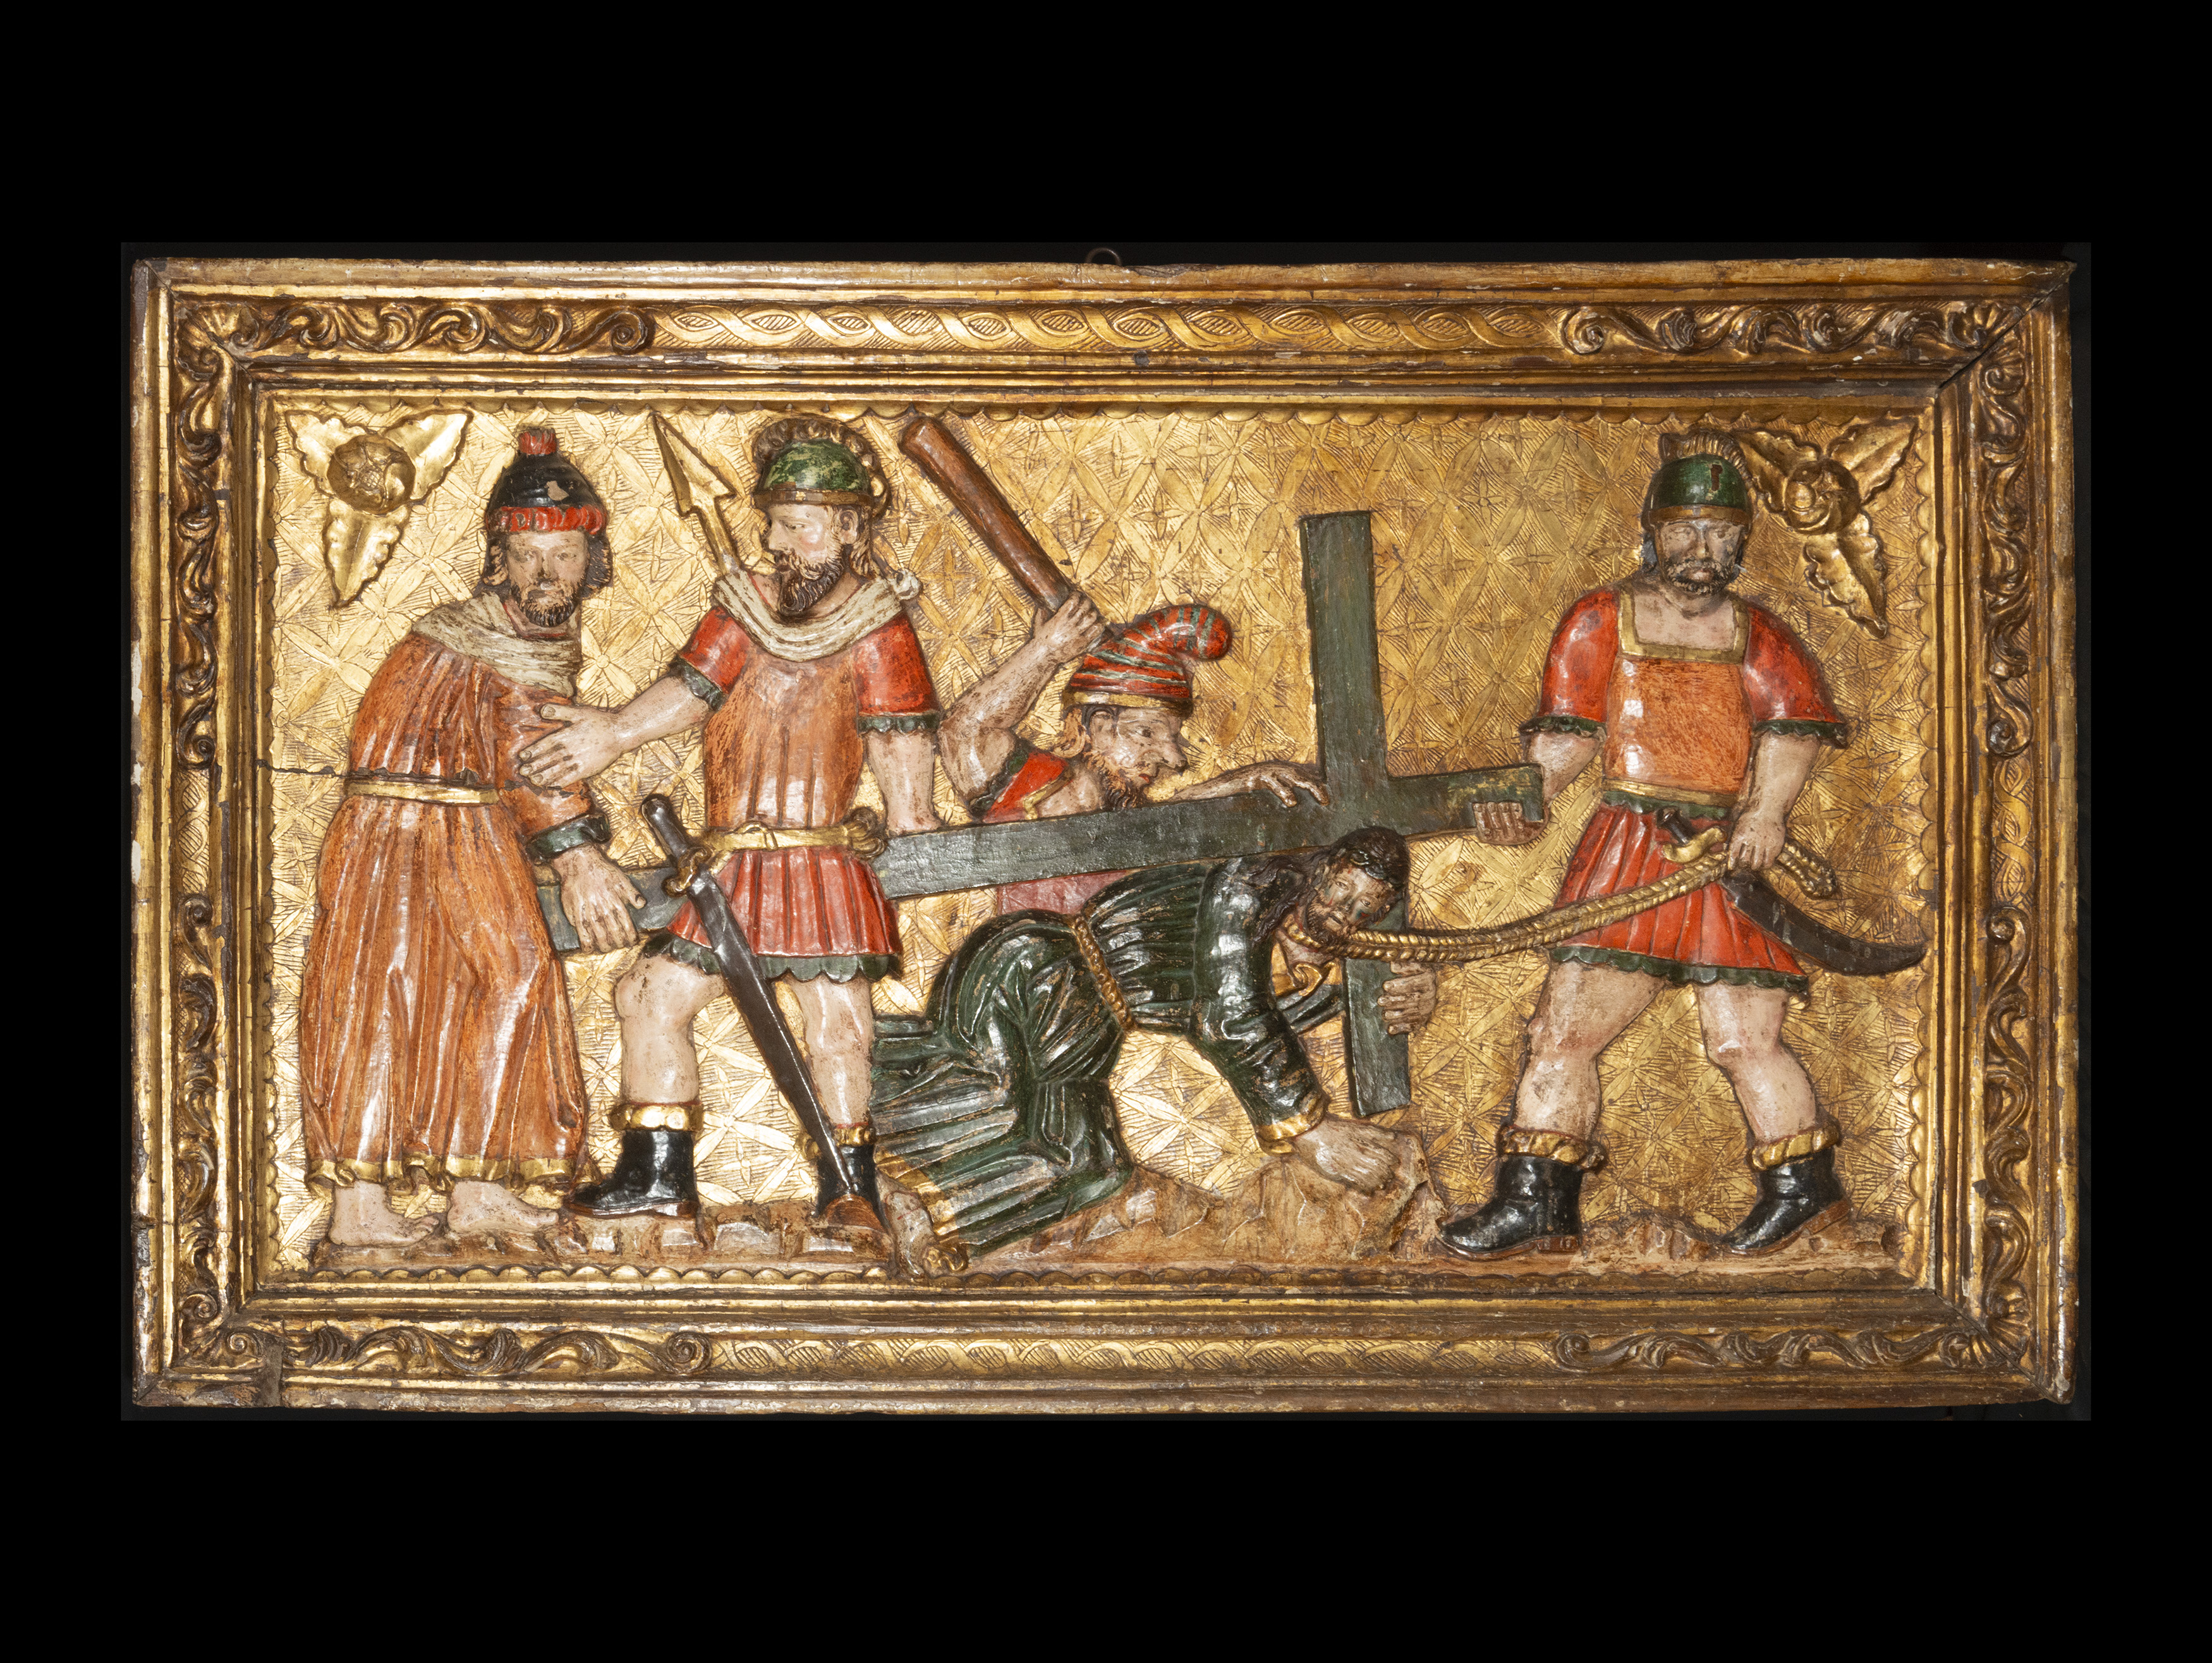 Gothic relief from the late 15th century representing Christ on the way to Calvary, Veneto or Tuscan